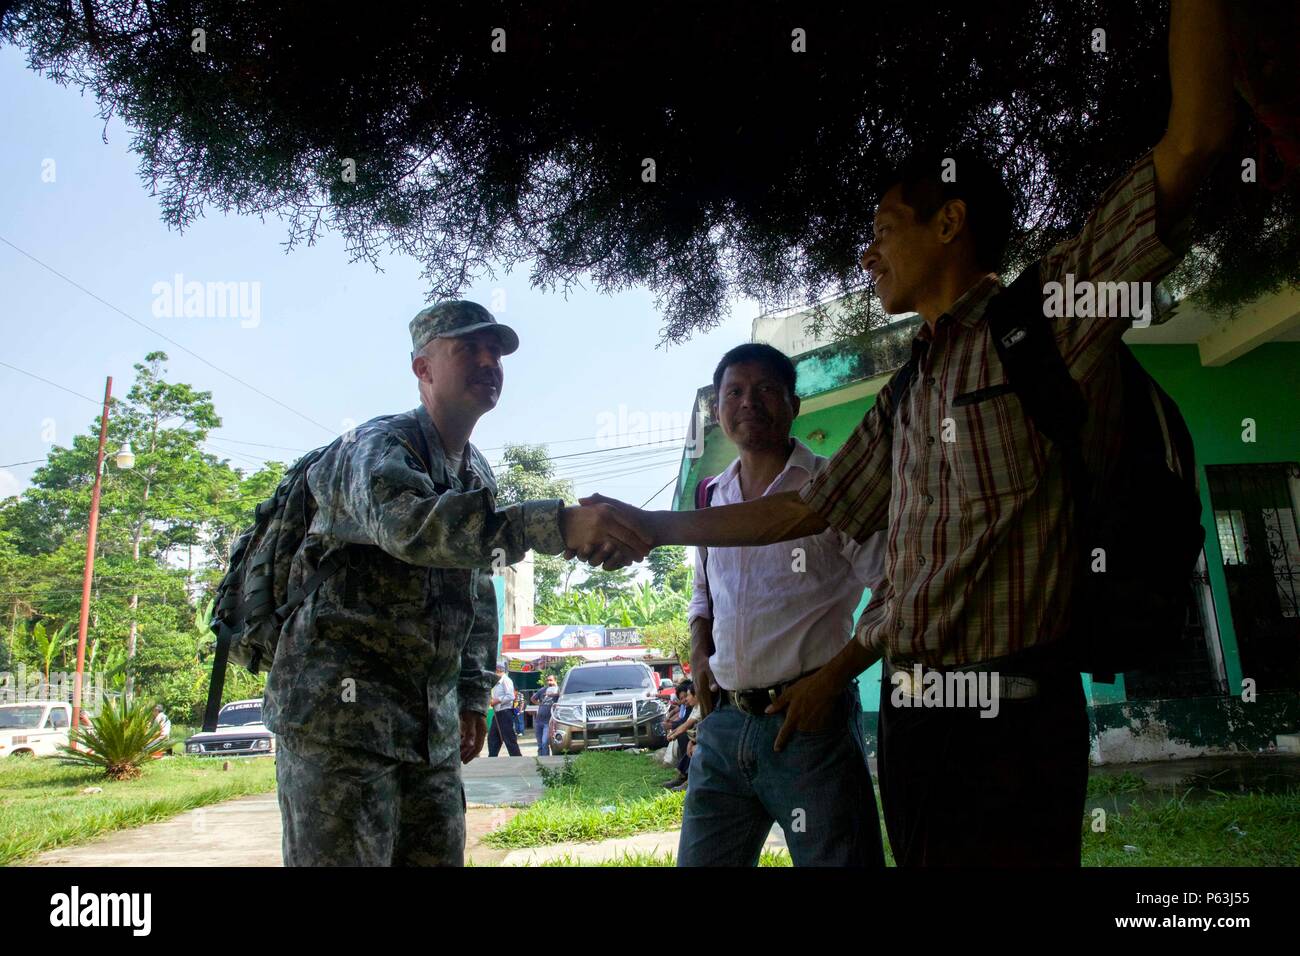 Master Sgt. Adolfo Gonzales from 71st Information Operations greets the local Cocodes to the Medical Readiness Exercise meeting as part of the Beyond The Horizon Operation at San Pablo, Guatemala, April 29, 2016. Task Force Red Wolf and Army South conducts Humanitarian Civil Assistance Training to include tactical level construction projects and Medical Readiness Training Exercises providing medical access and building schools in Guatemala with the Guatemalan Government and non-government agencies from 05MAR16 to 18JUN16 in order to improve the mission readiness of US forces and to provide a l Stock Photo